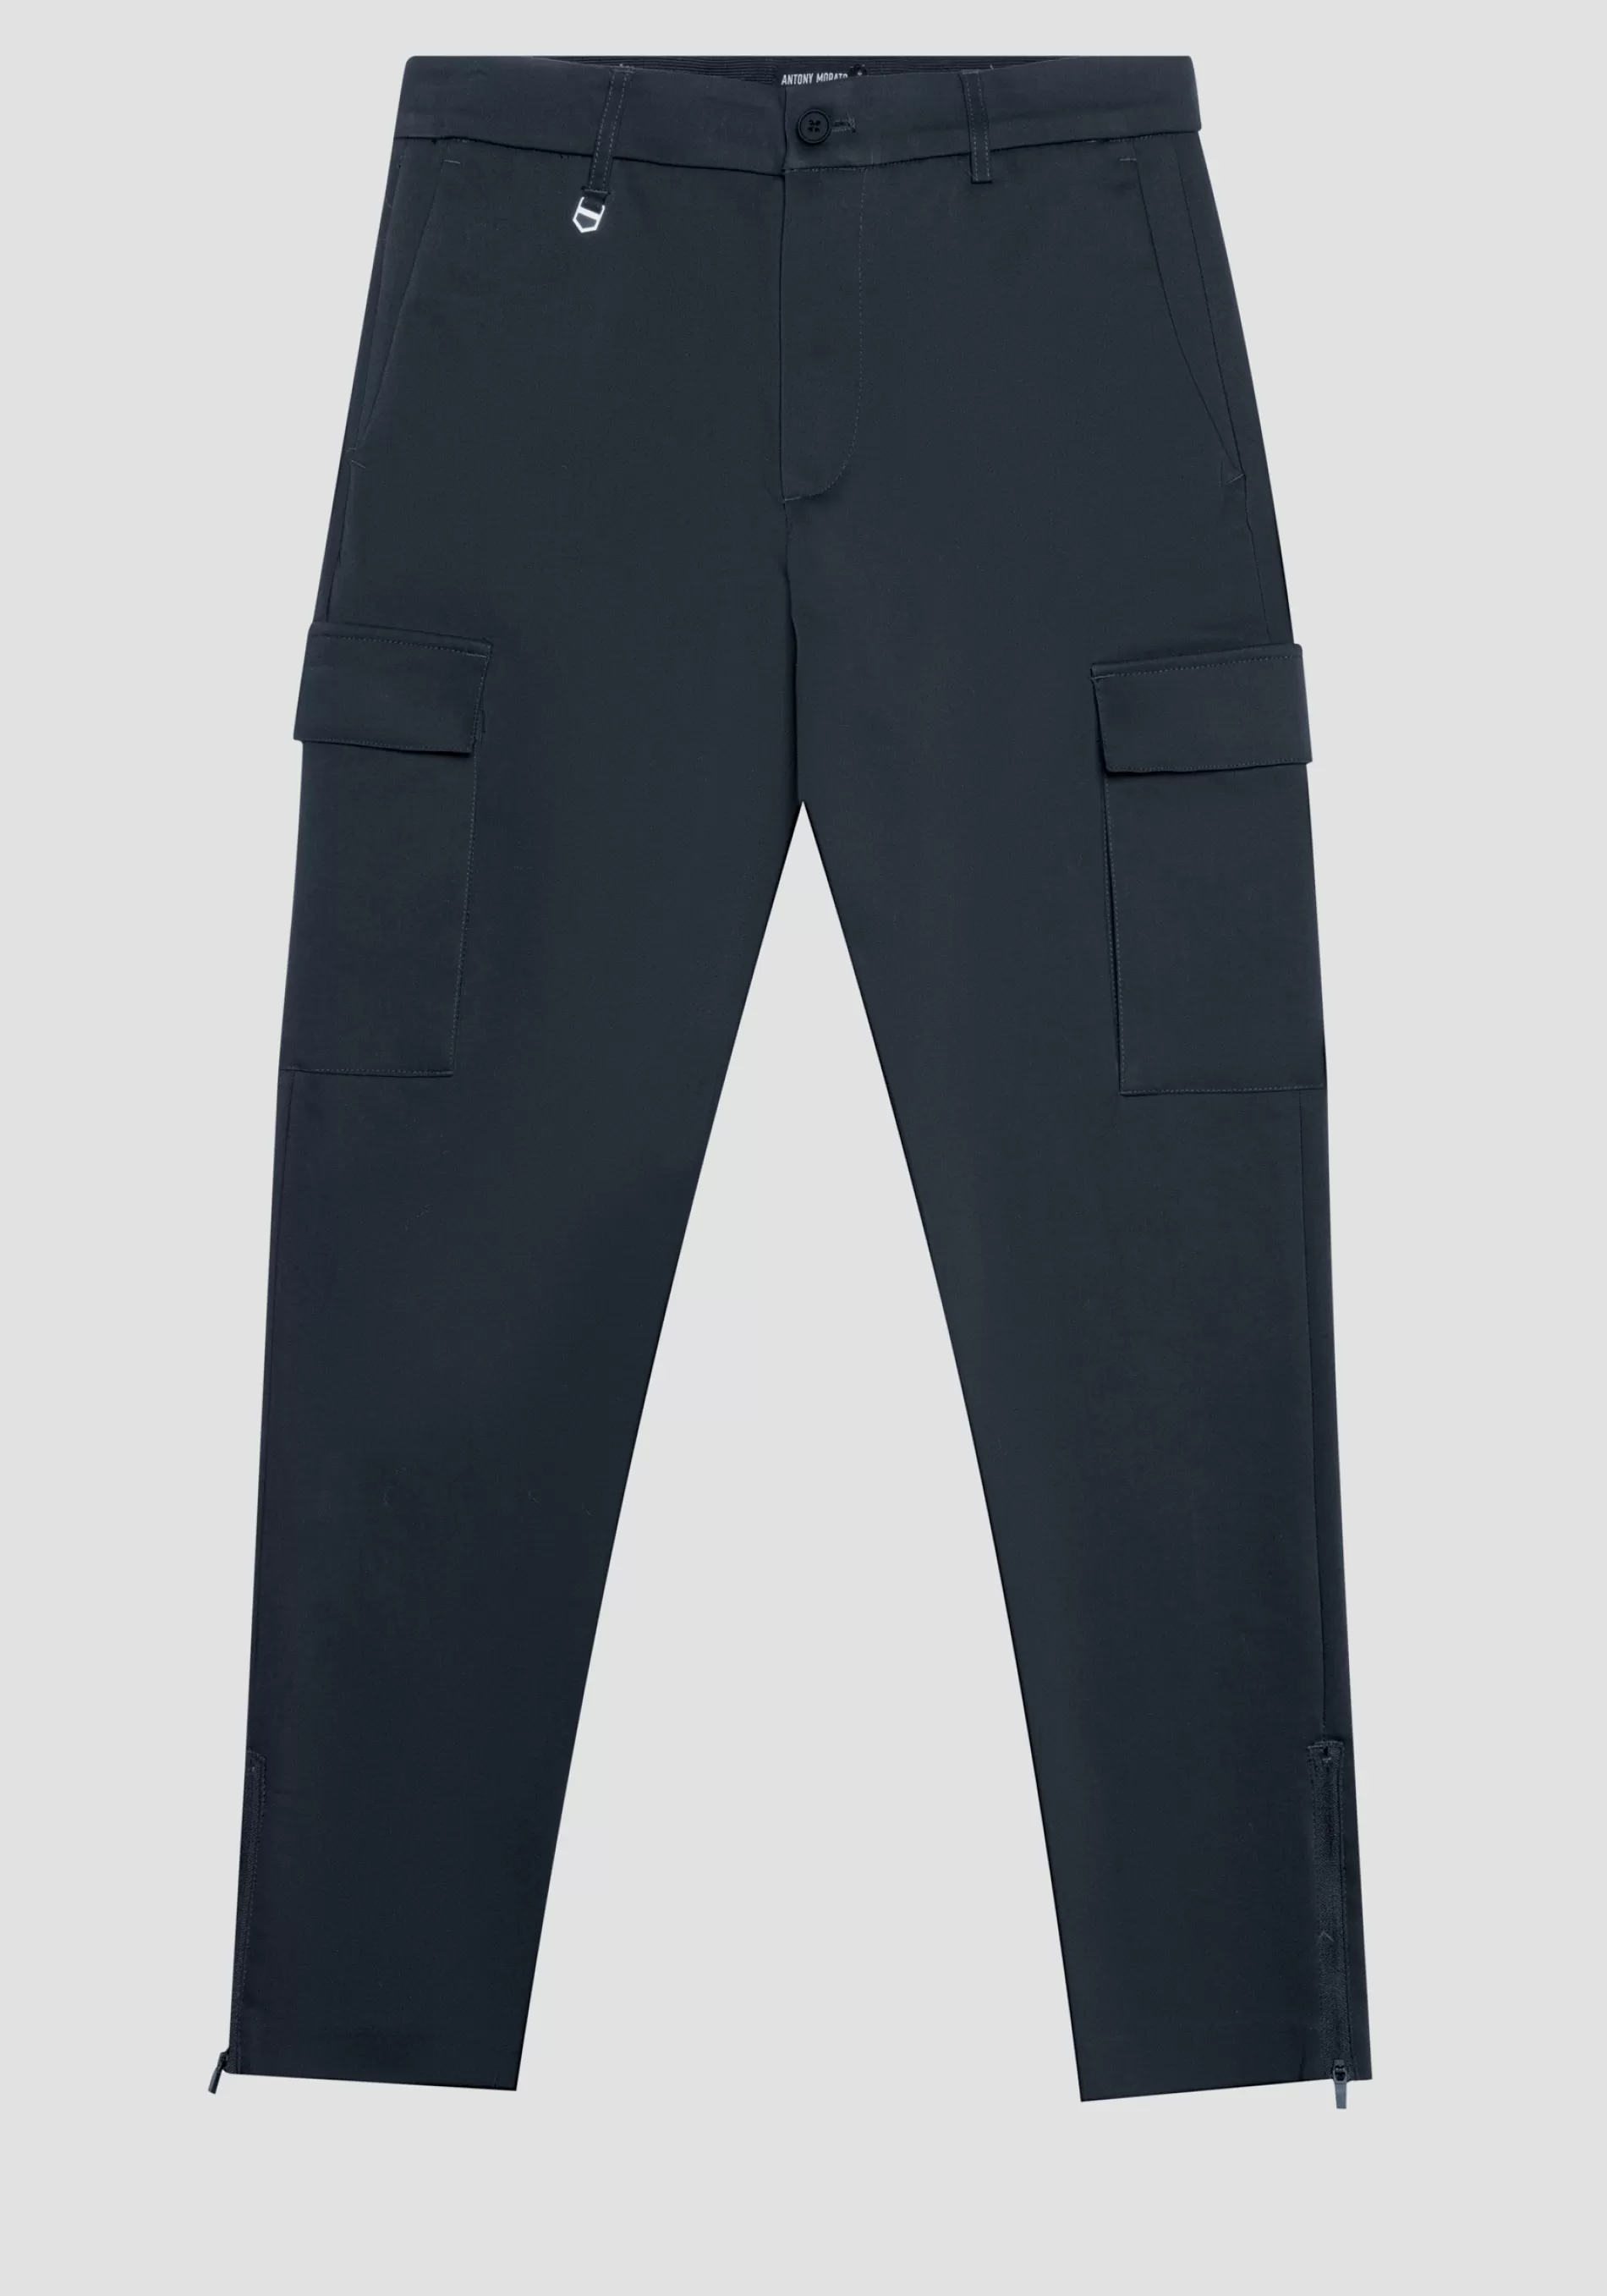 Best "BJORN" SKINNY FIT TROUSERS IN ELASTIC COTTON BLEND WITH SIDE POCKETS AND ZIP ON THE BOTTOM Trousers